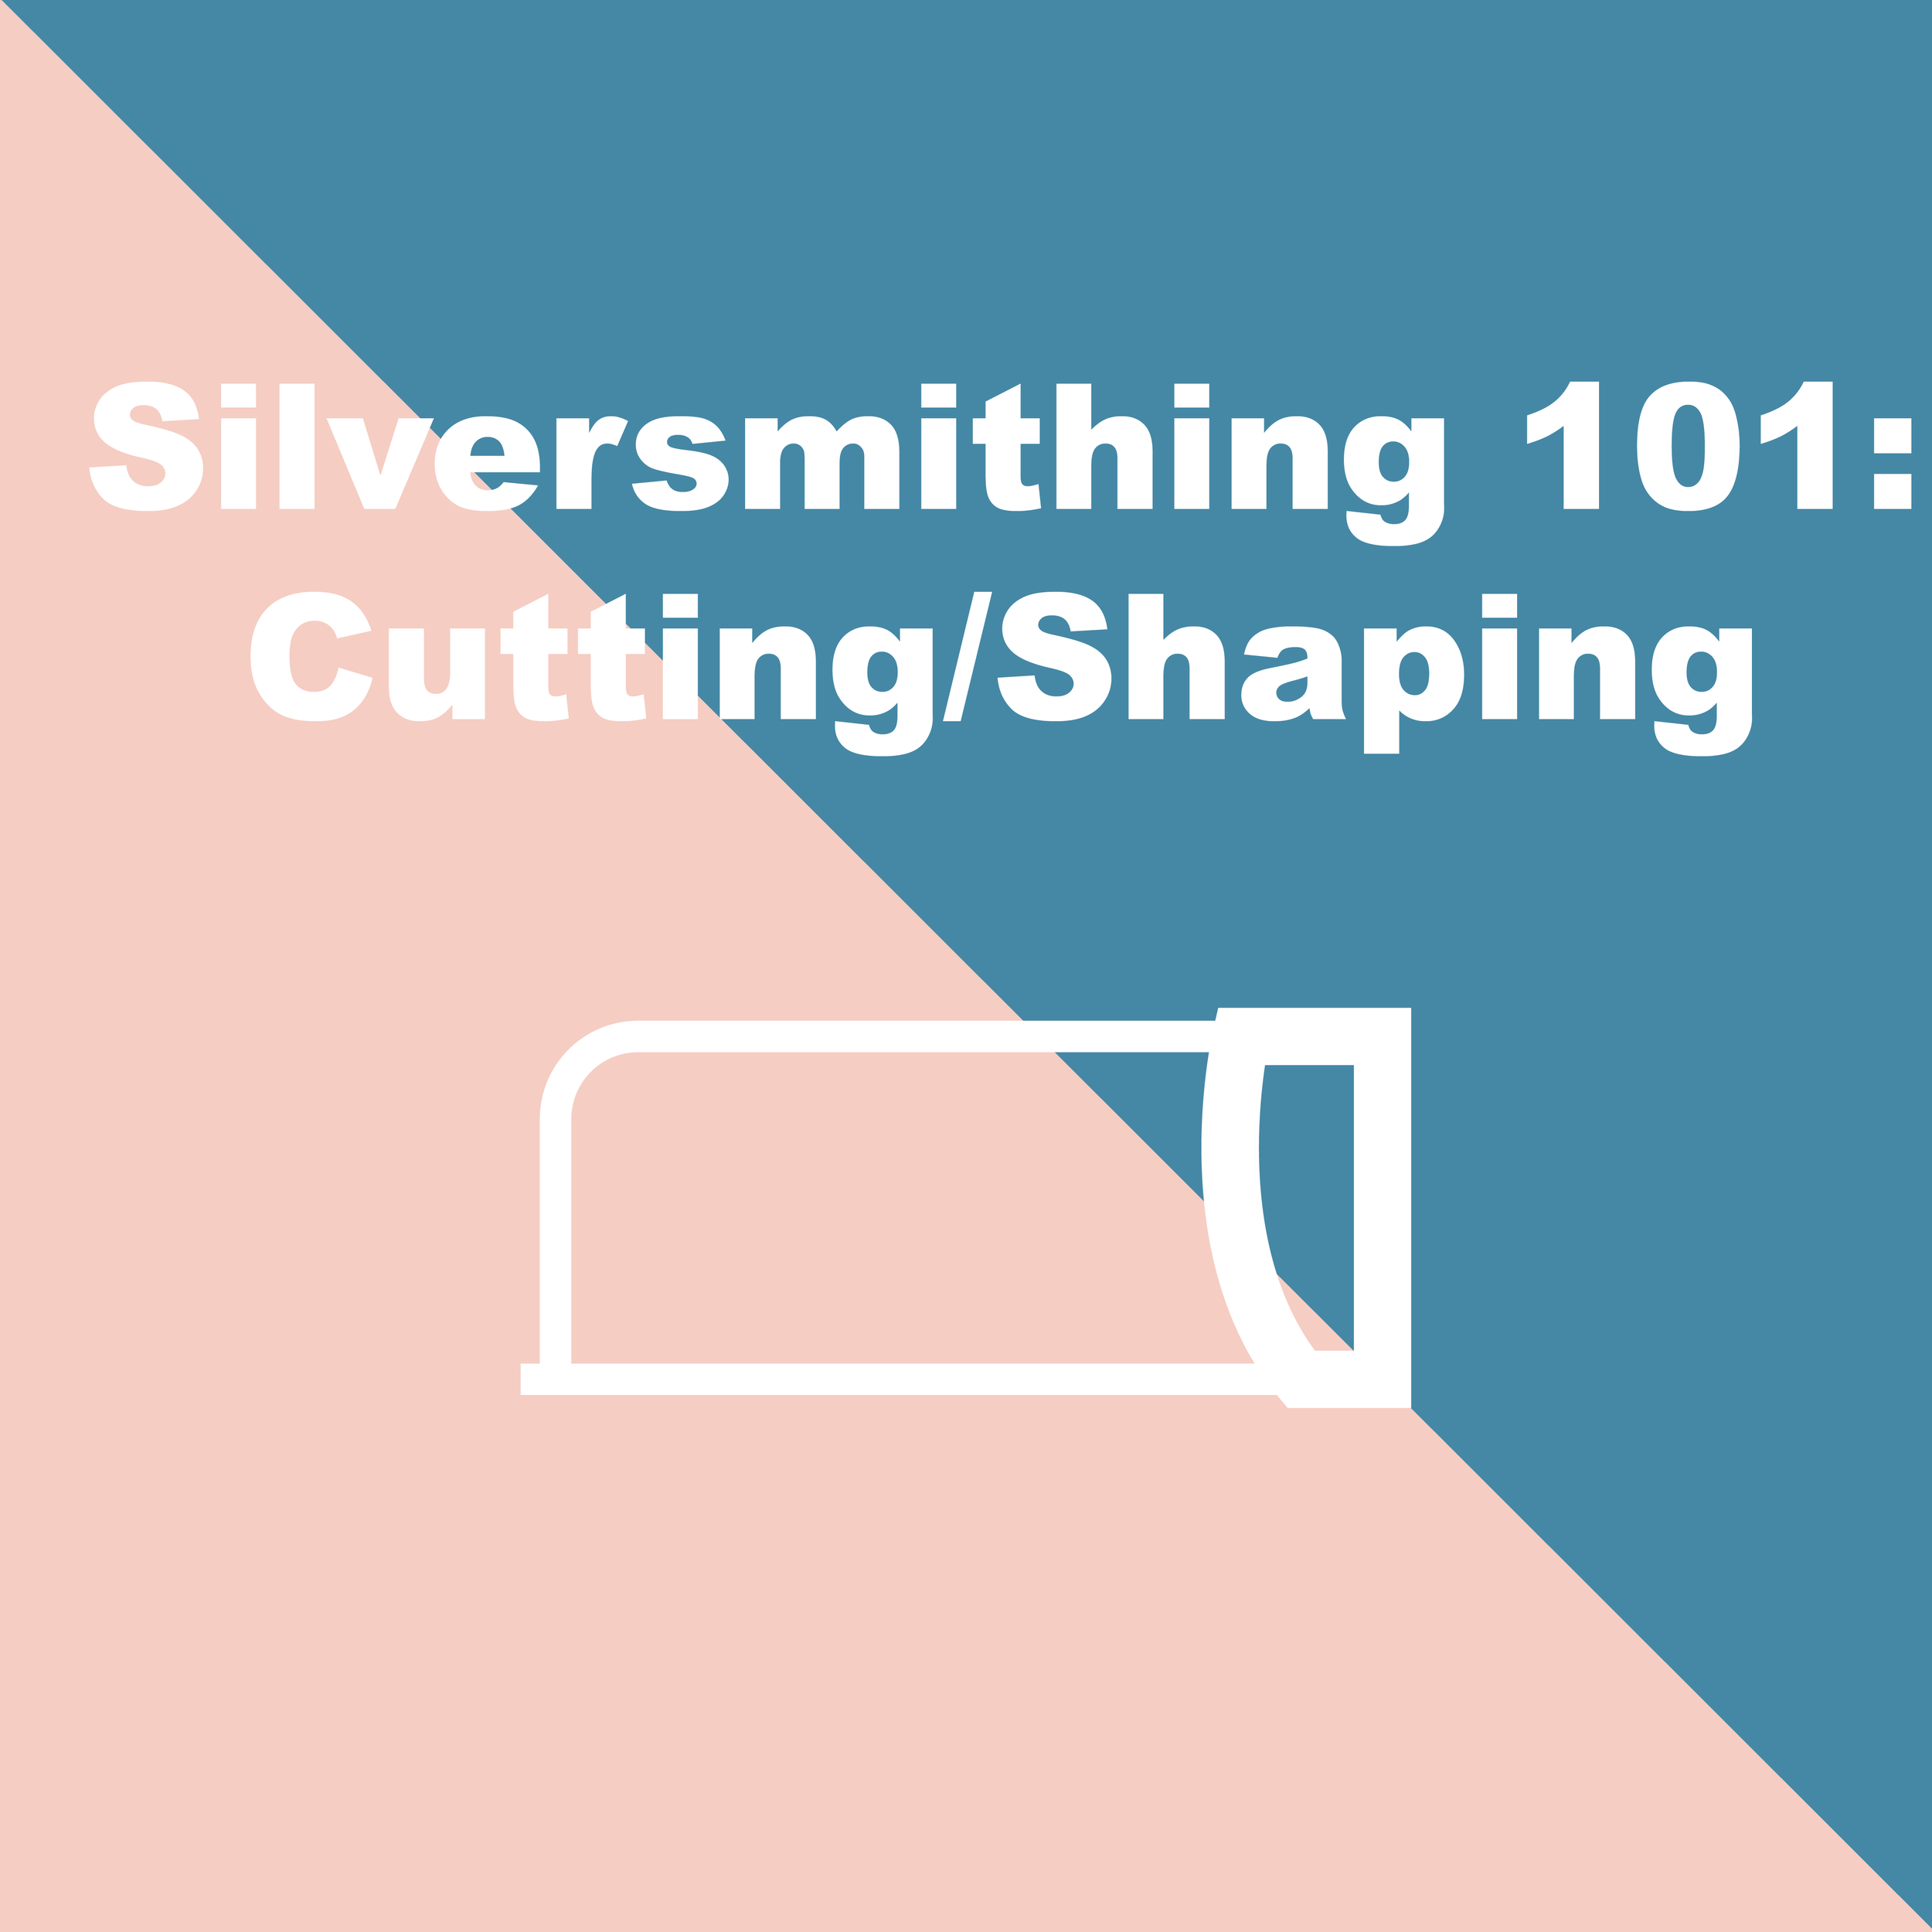 Silversmith Cutting_3d printing graphic.png